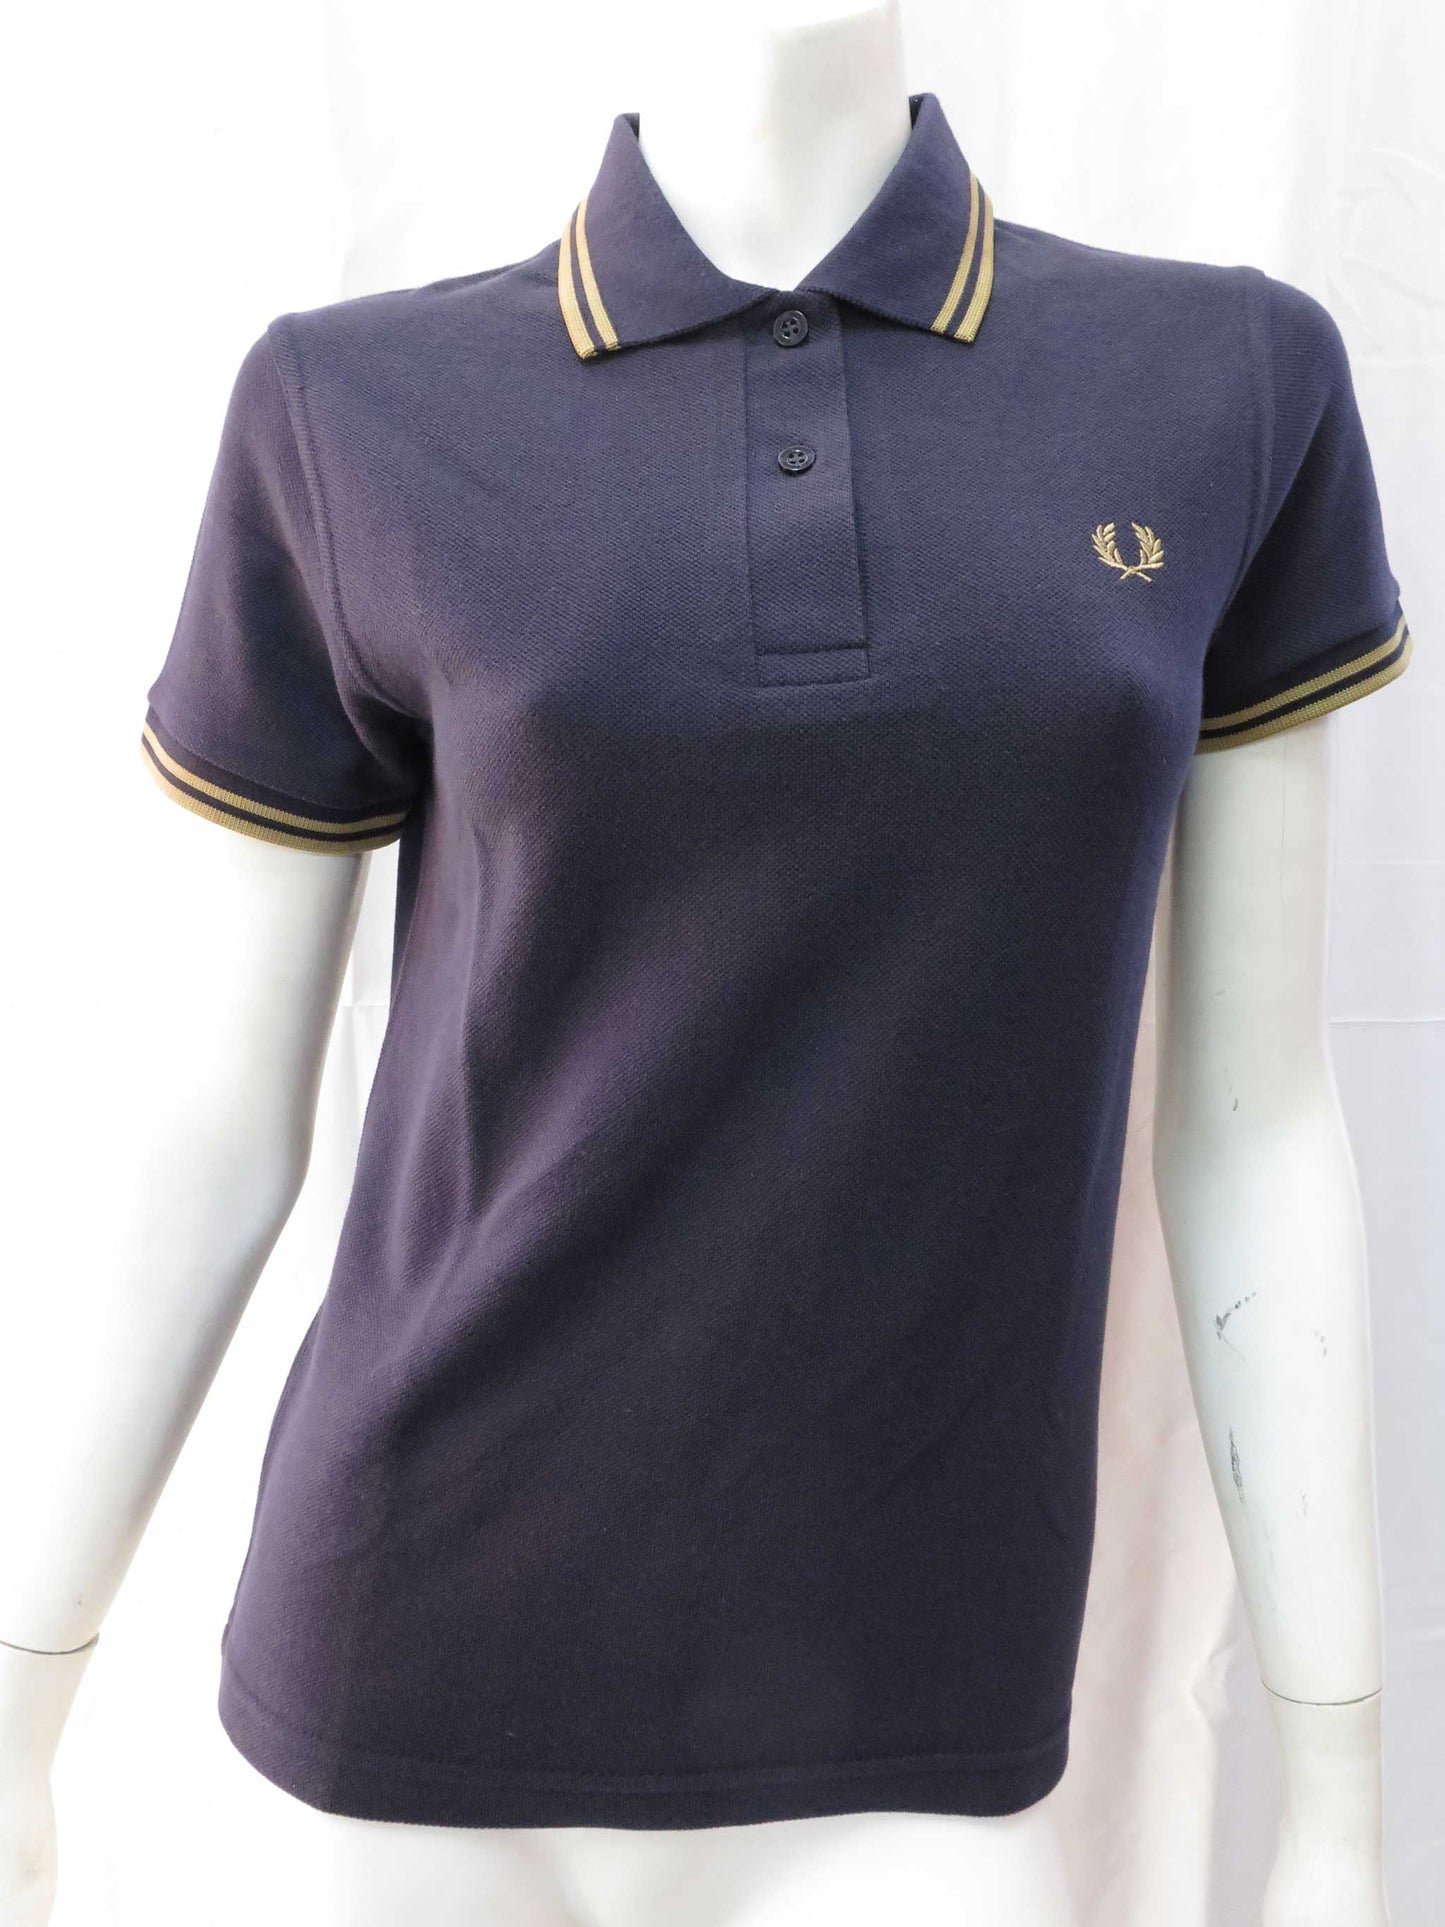 LADIES MADE IN ENGLAND FRED PERRY SHIRT (NAVY/GOLD)